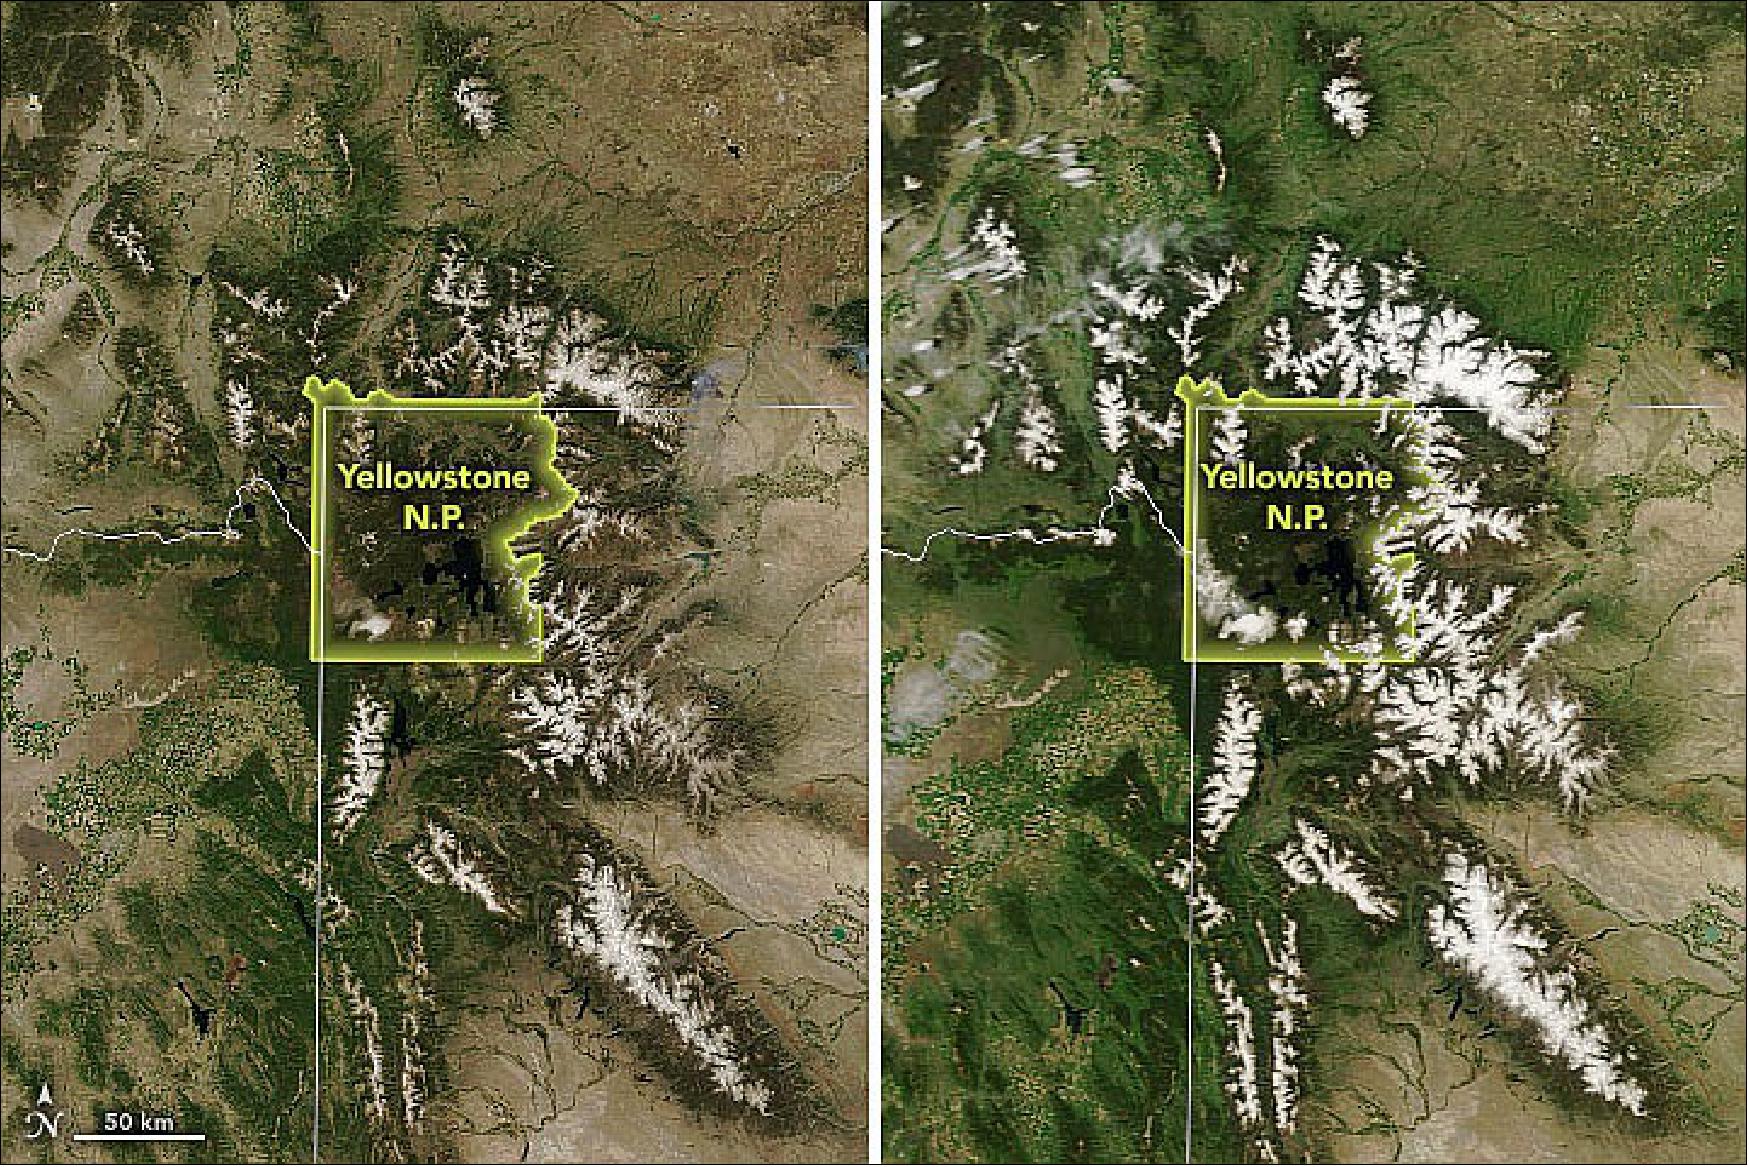 Figure 13: Despite a slow start to the 2021–2022 water year, a cool, wet spring brought much-needed water to the region, which has been experiencing drought conditions. In April, higher than median precipitation in the Yellowstone basin helped build up the snowpack on the ground, which had increased to nearly the 30-year median by May. The Moderate Resolution Imaging Spectroradiometer (MODIS) on NASA's Terra satellite captured these images comparing snowpack on June 16, 2022, to the snowpack on the same date in 2021 (image credit: NASA Earth Observatory images by Joshua Stevens, using soil moisture data from Crop Condition and Soil Moisture Analytics (Crop-CASMA) and MODIS data from NASA EOSDIS LANCE and GIBS/Worldview. Story by Sara E. Pratt)